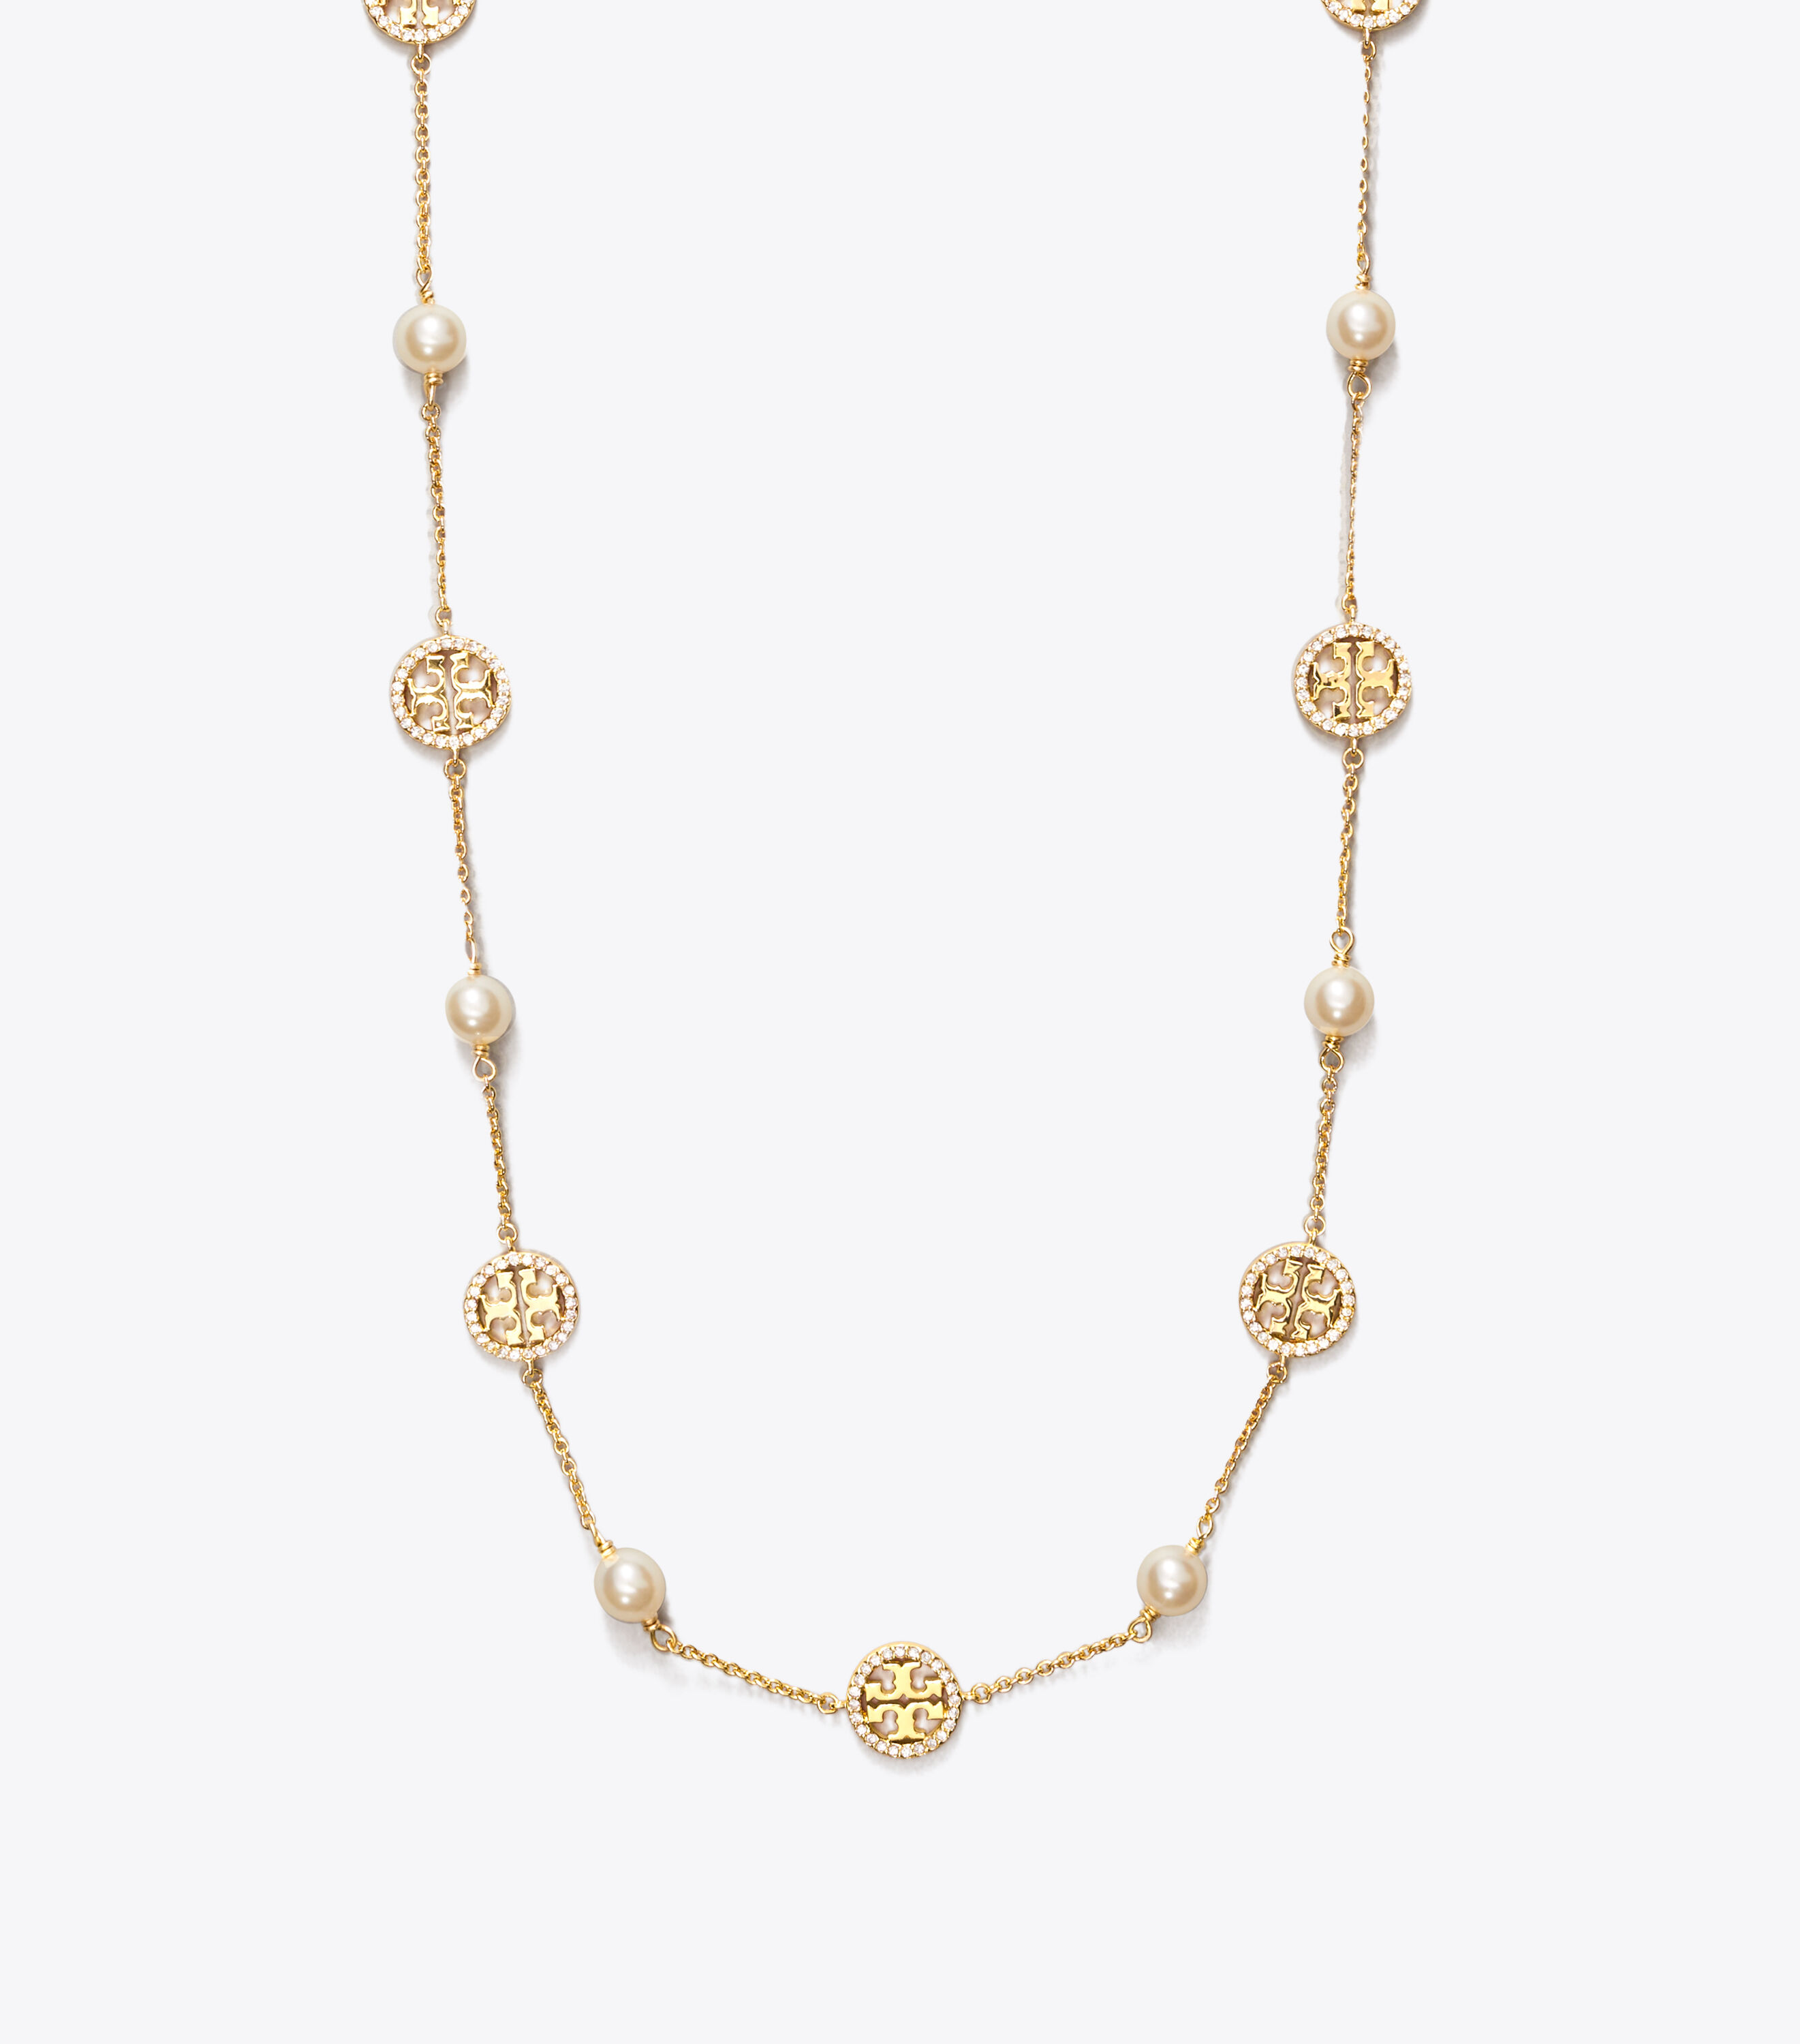 Tory Burch Tory Burch RABBIT DOUBLE-STRAND NECKLACE 198.00